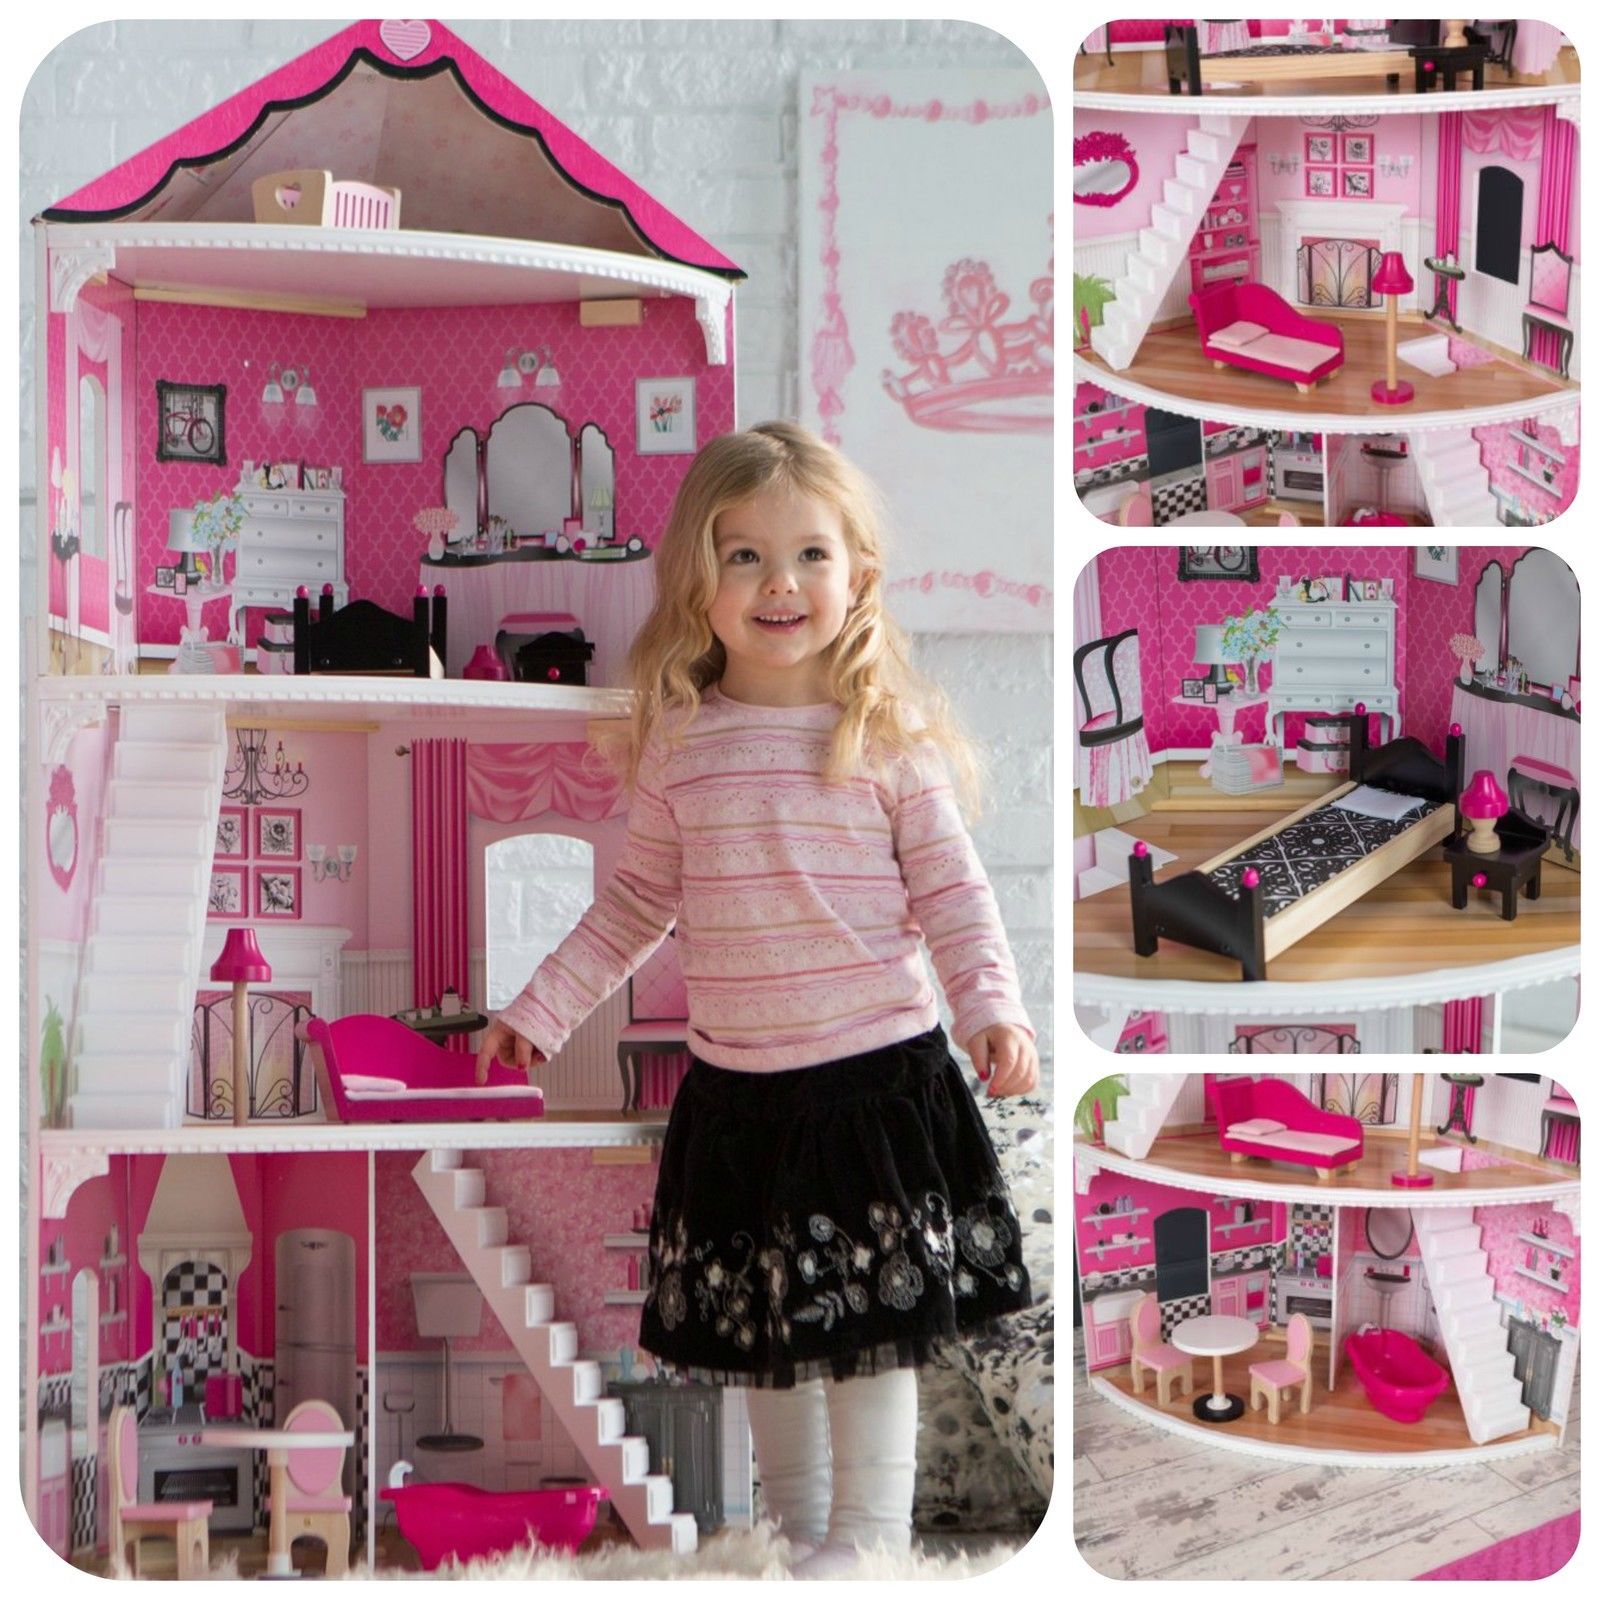 Wooden Dollhouse for Girls Pink Wood Doll House Set Toy with Furniture Kids Play